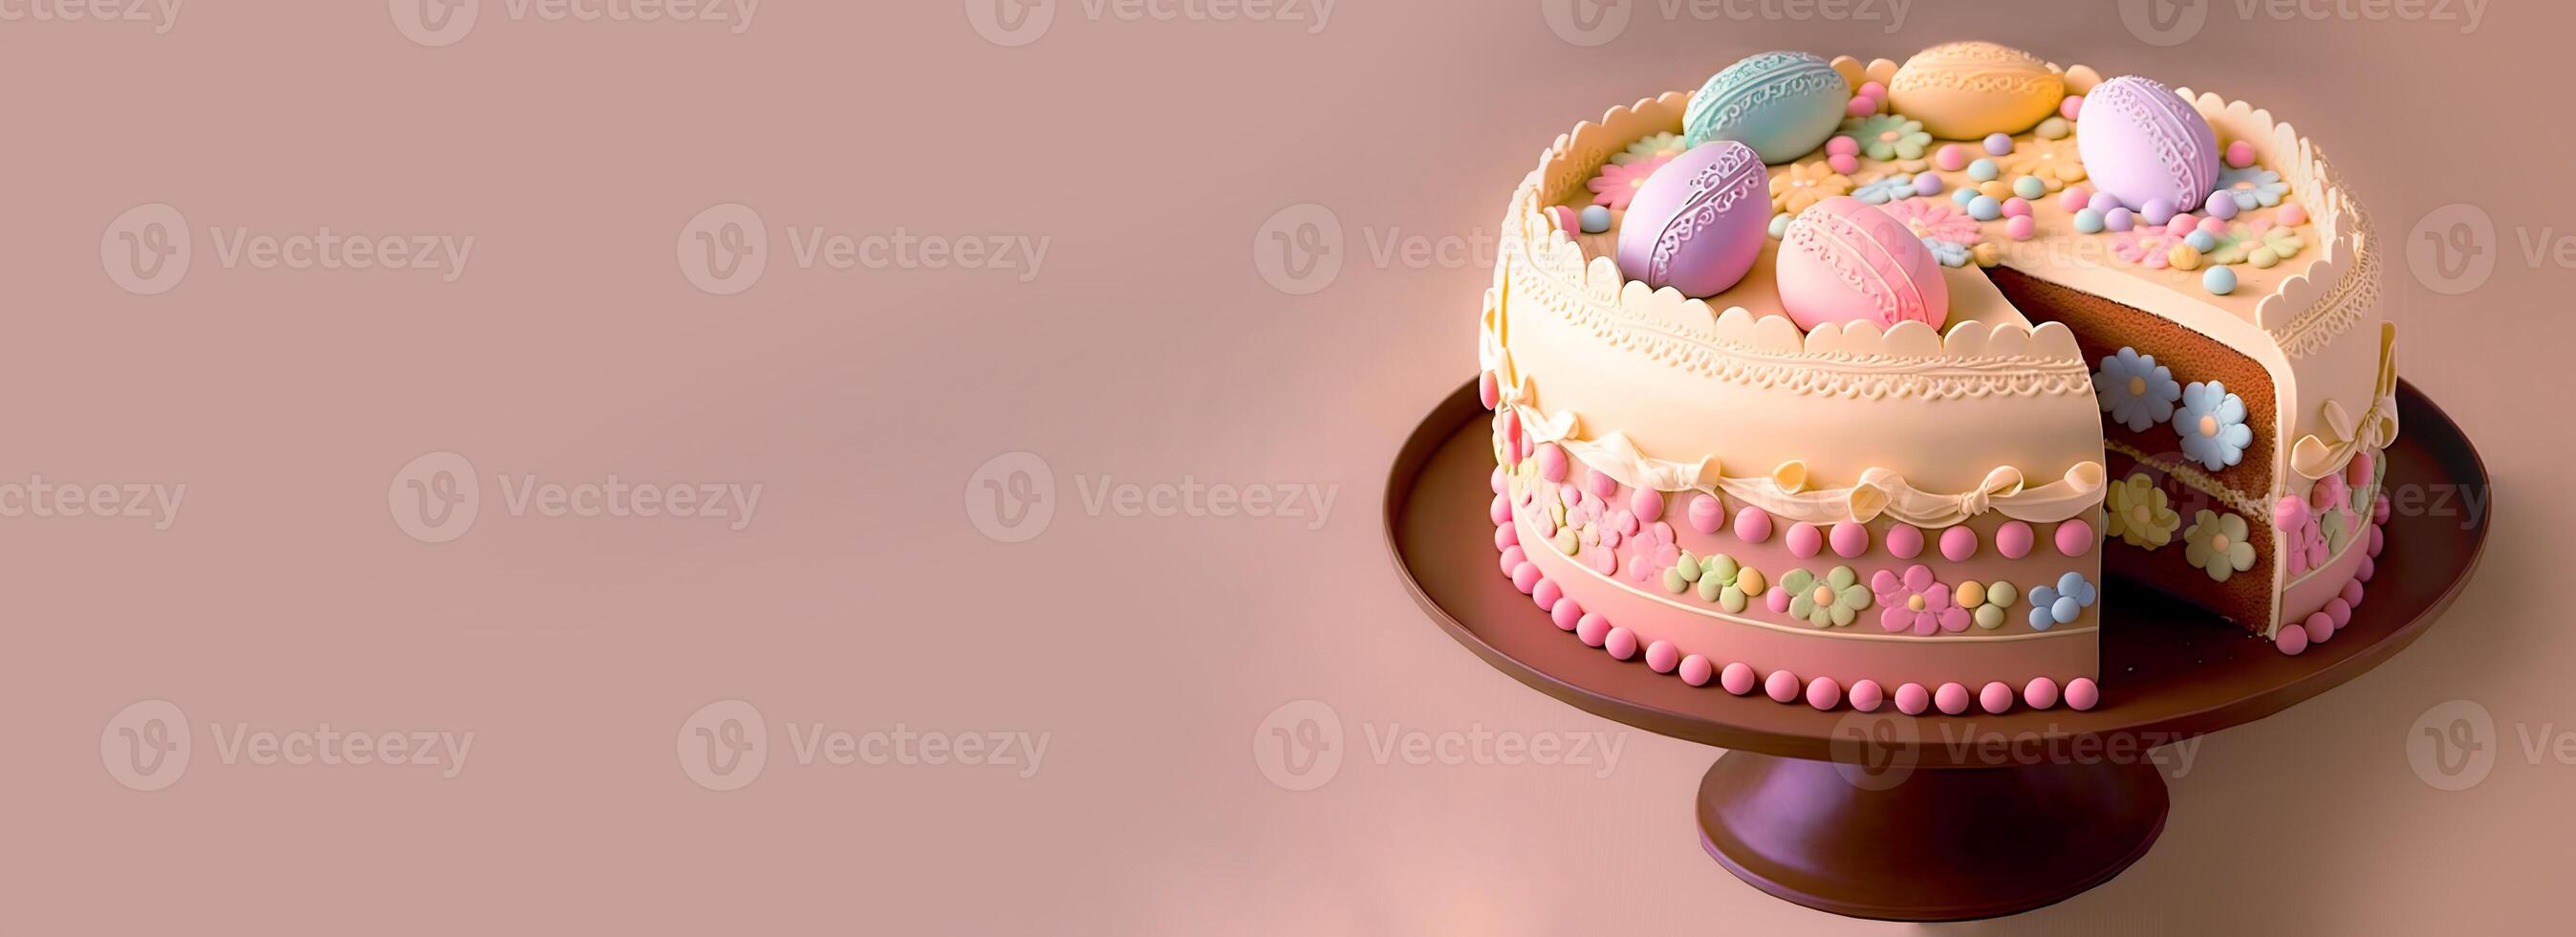 3D Render of Soft Color Flowers And Easter Eggs Decorative Cake on Pastel Pink Background And Copy Space. Easter Day Celebration Concept. photo